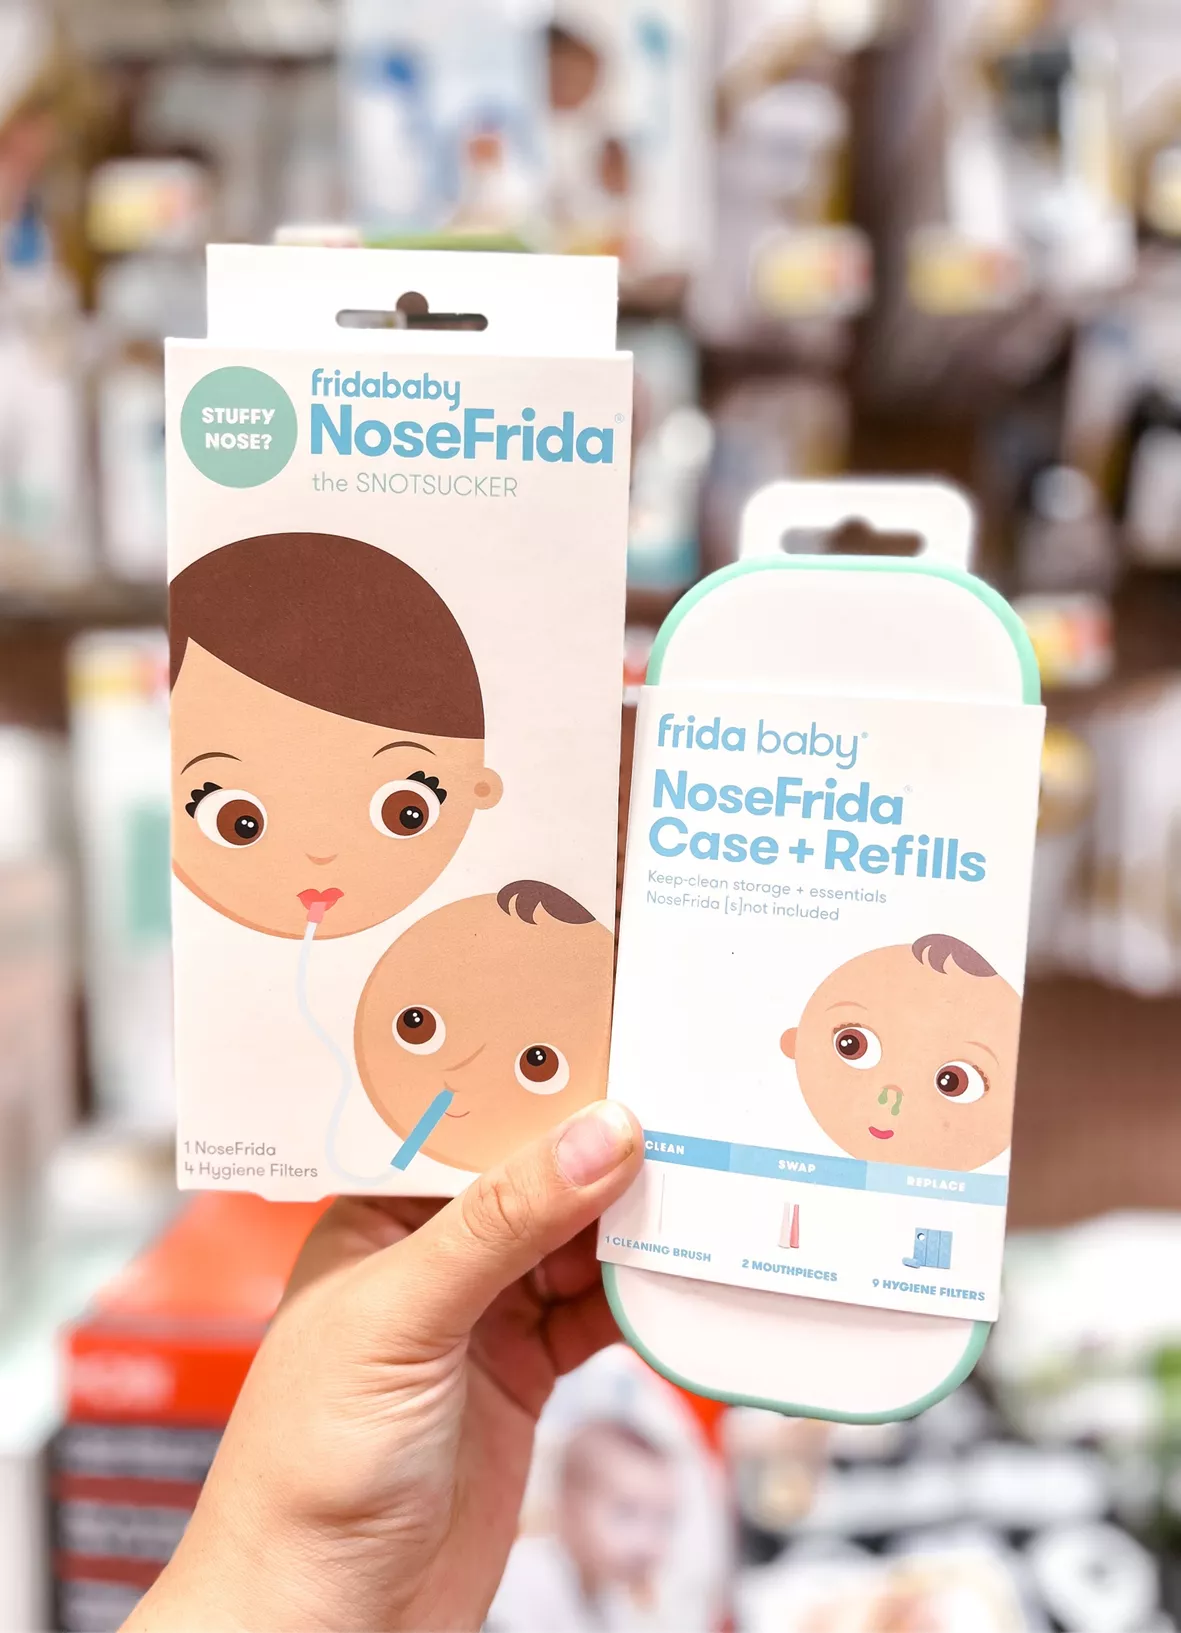 4 Ways to Make Sure You're Using Your FridaBaby NoseFrida Like a Pro